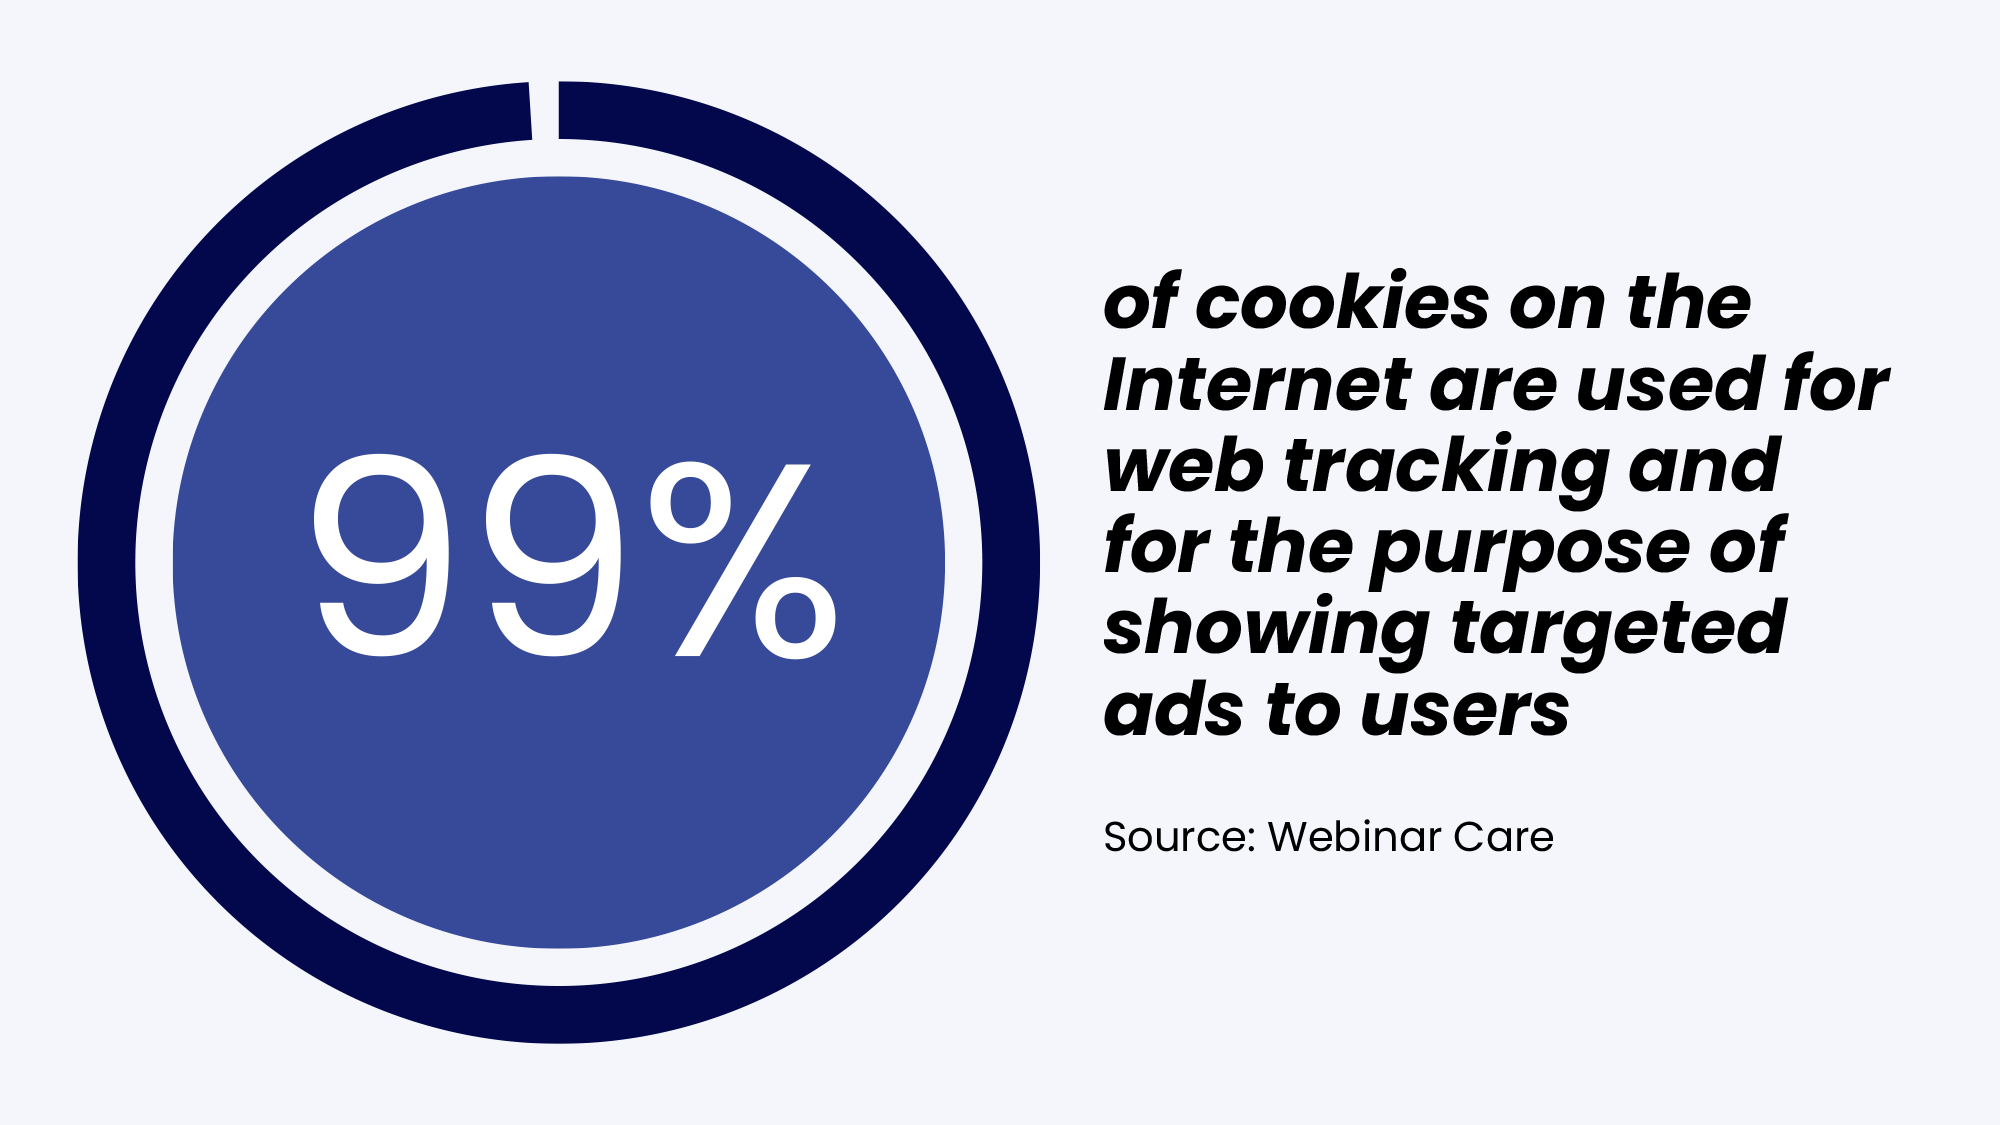 99% of cookies on the Internet are used for web tracking and for the purpose of showing targeted ads to users